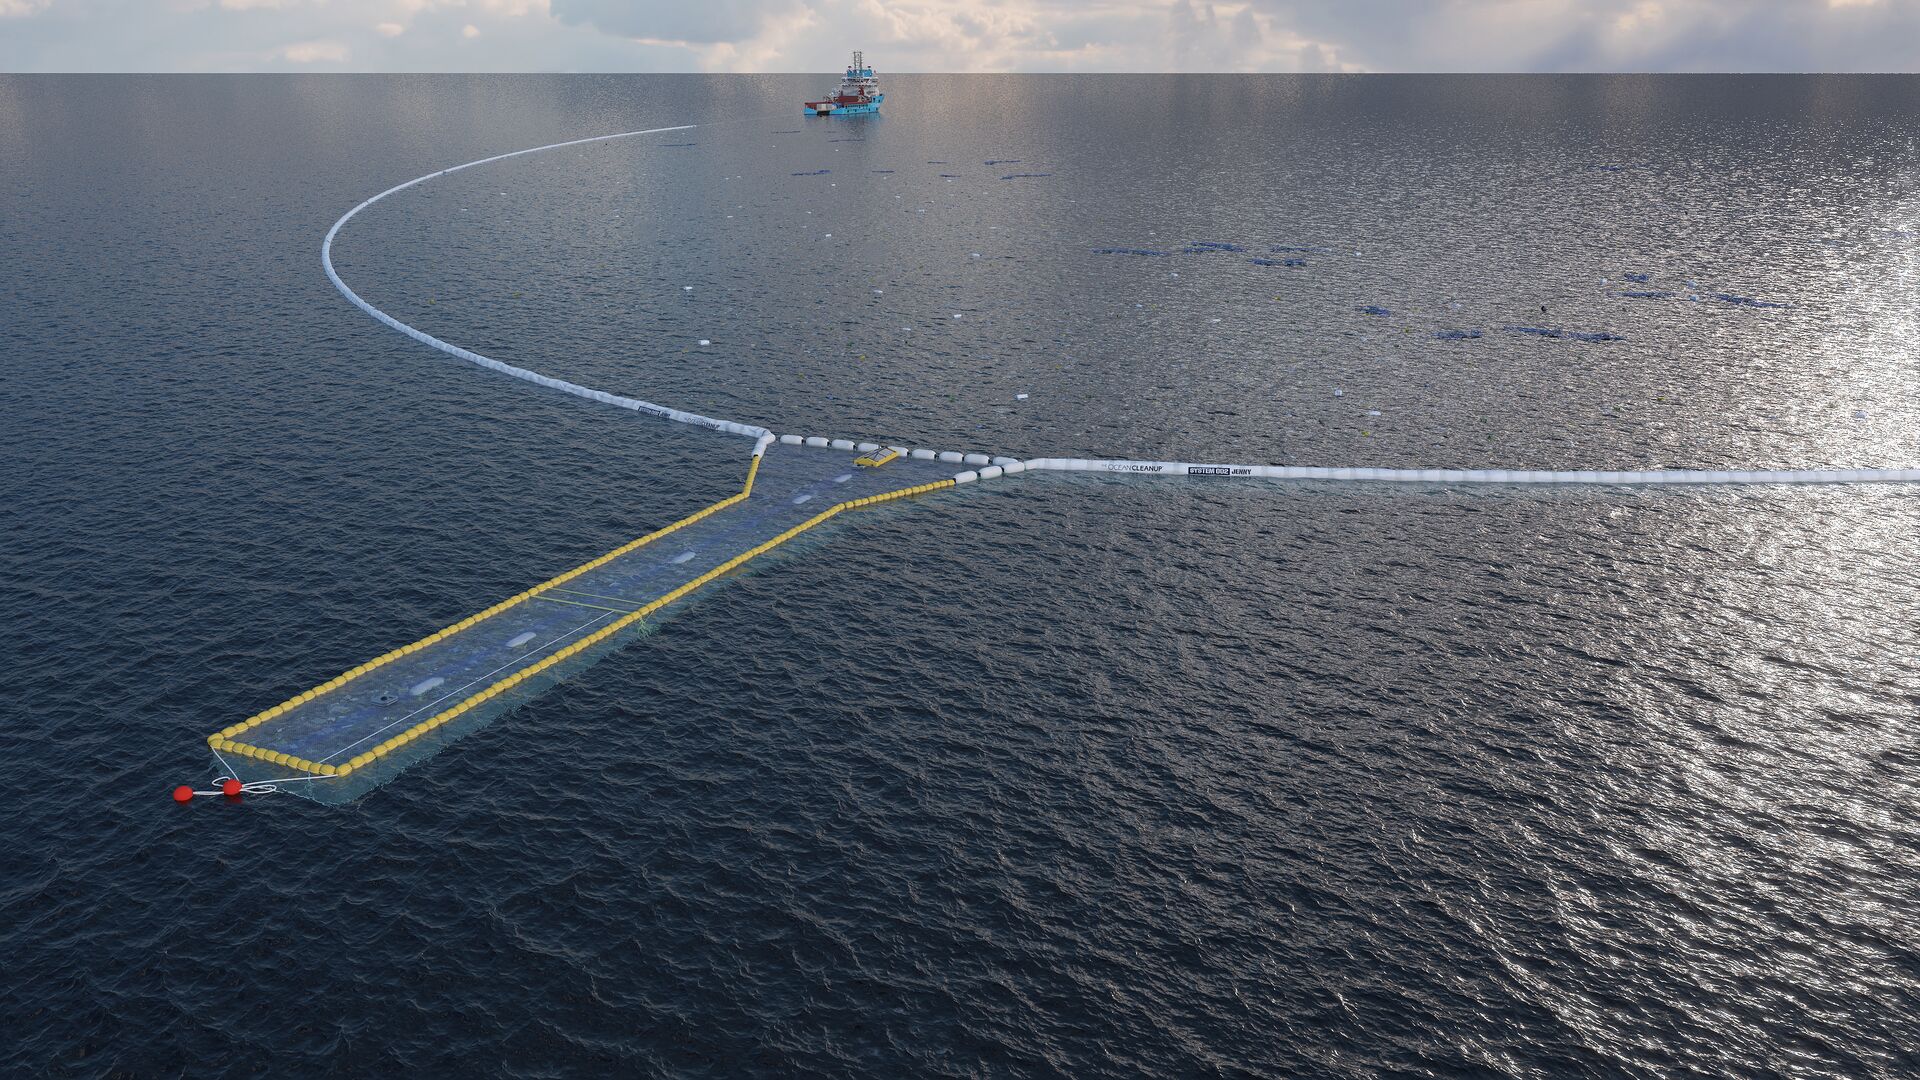 Maersk Tender in partnership with The Ocean Cleanup